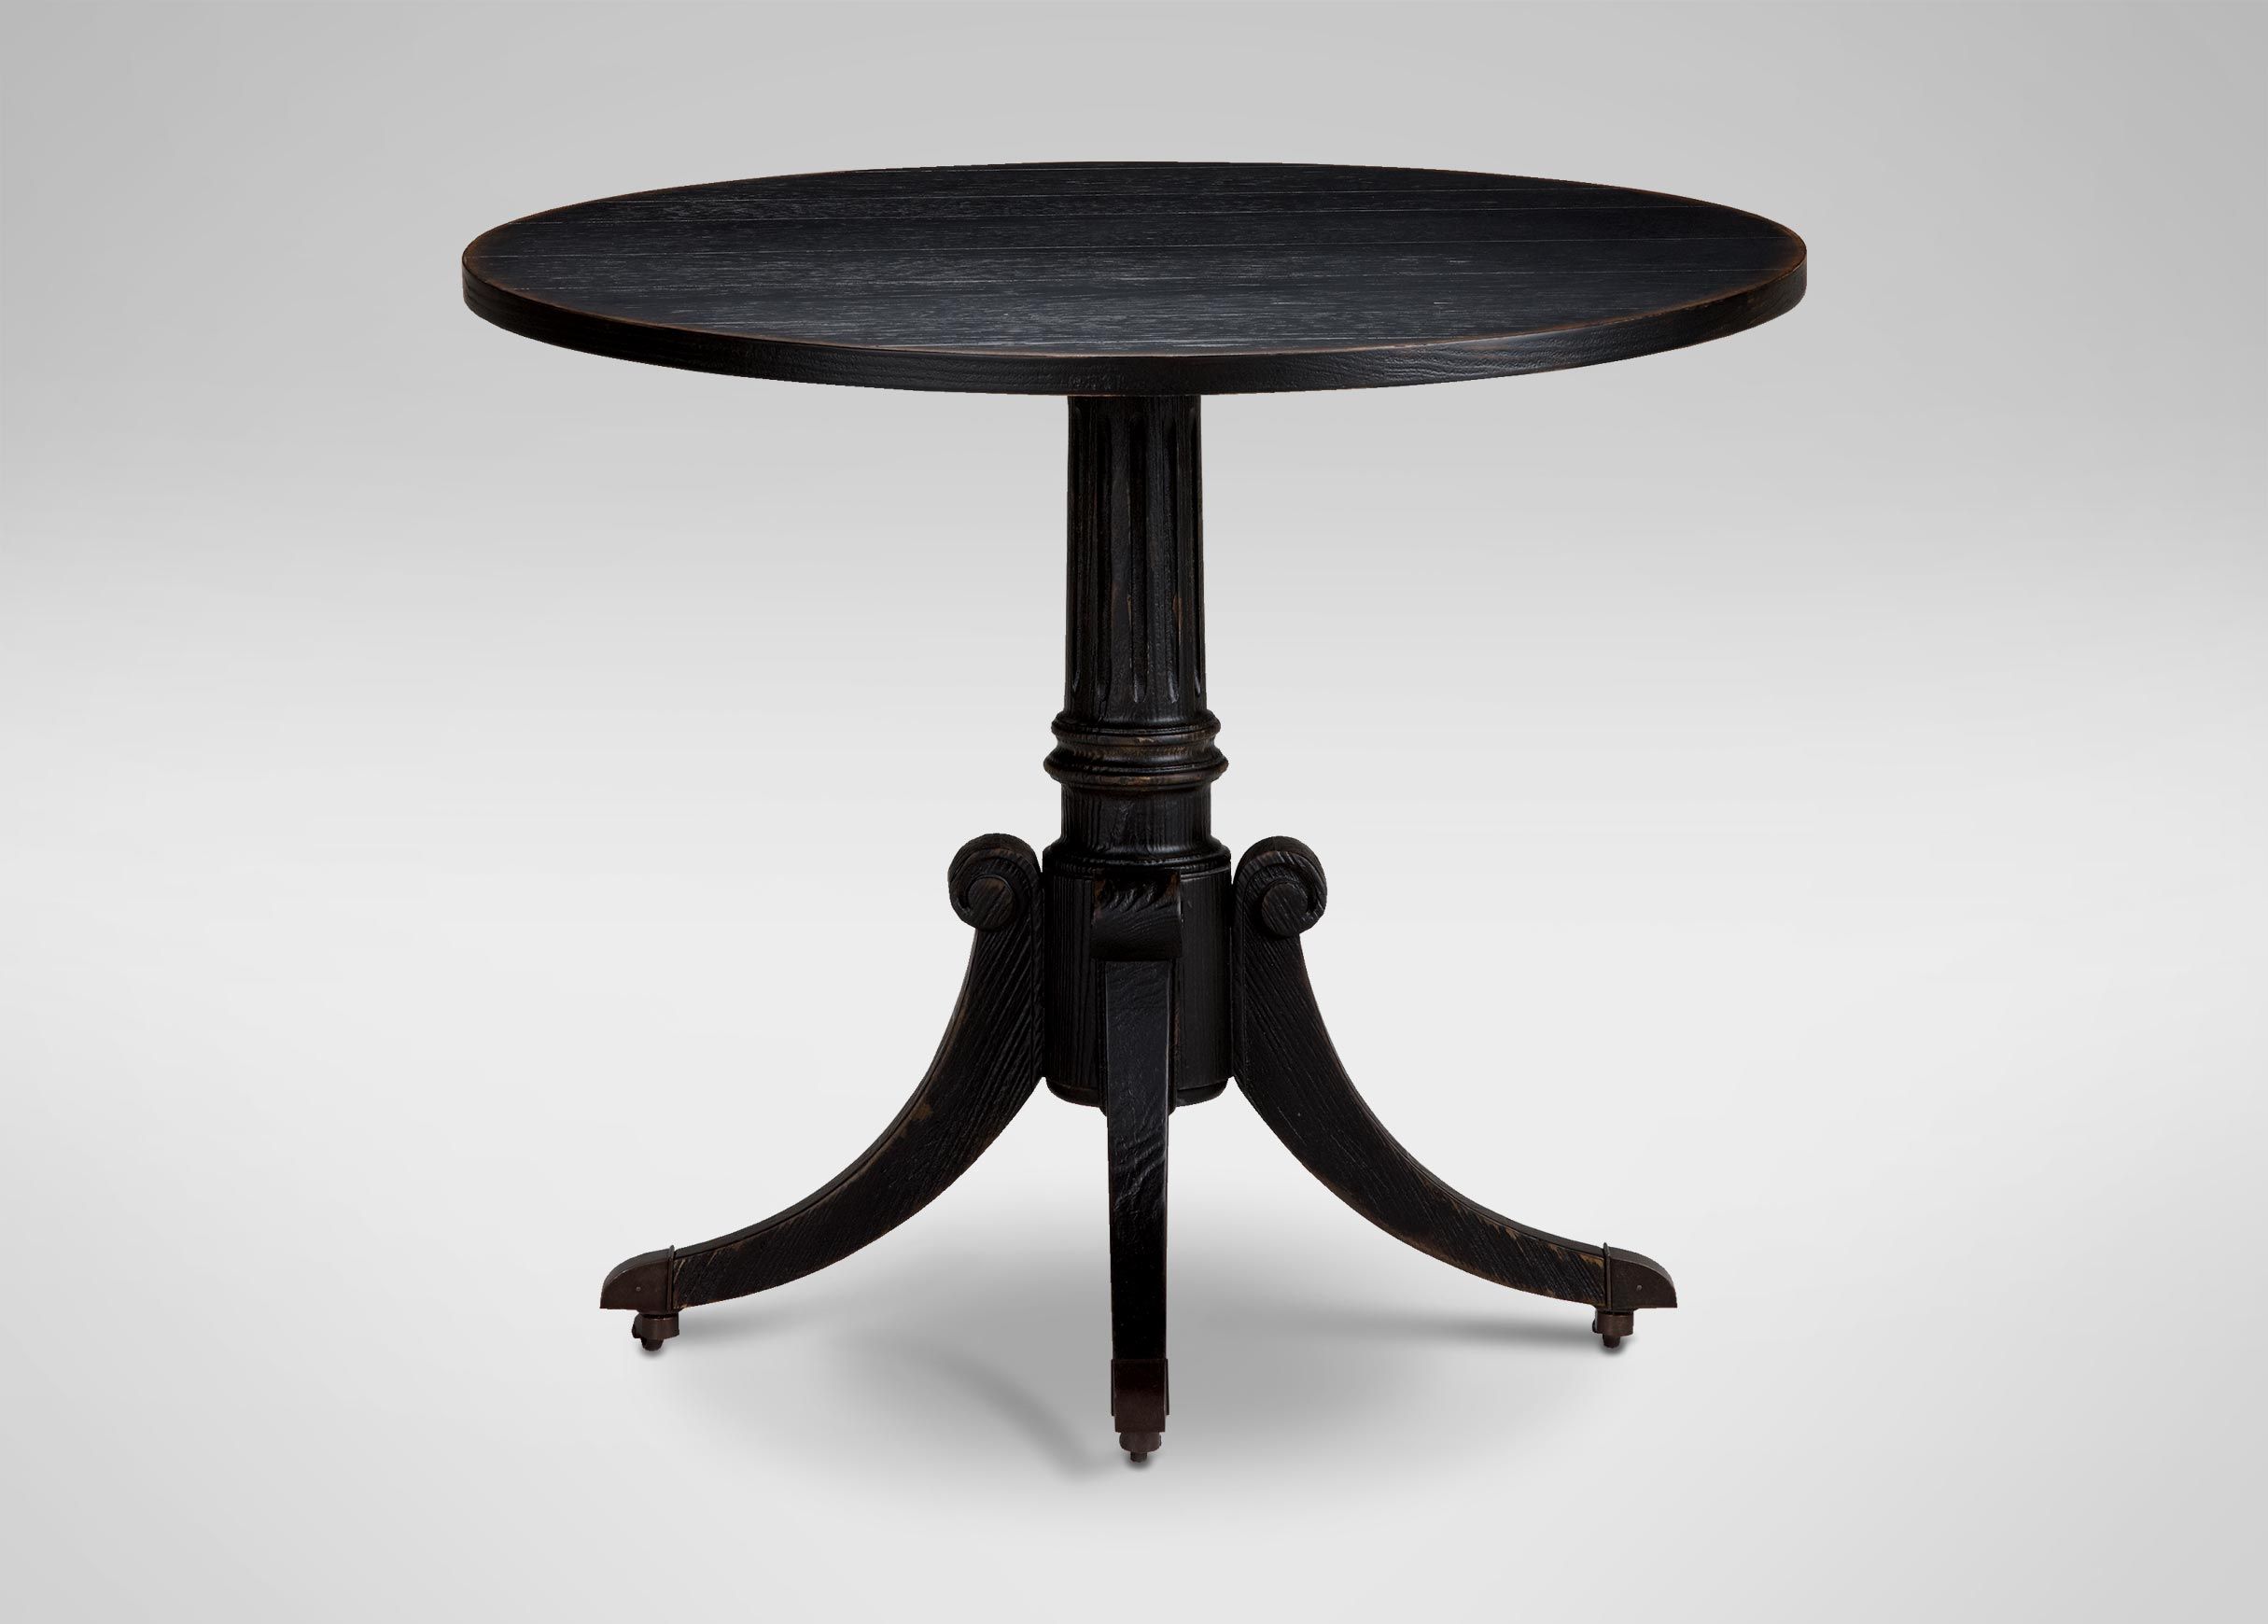 vienna round pedestal table clearance farmhouse accent tables unique patio furniture broadmoore end unusual home decor umbrella wedge base height and chairs target dinosaur